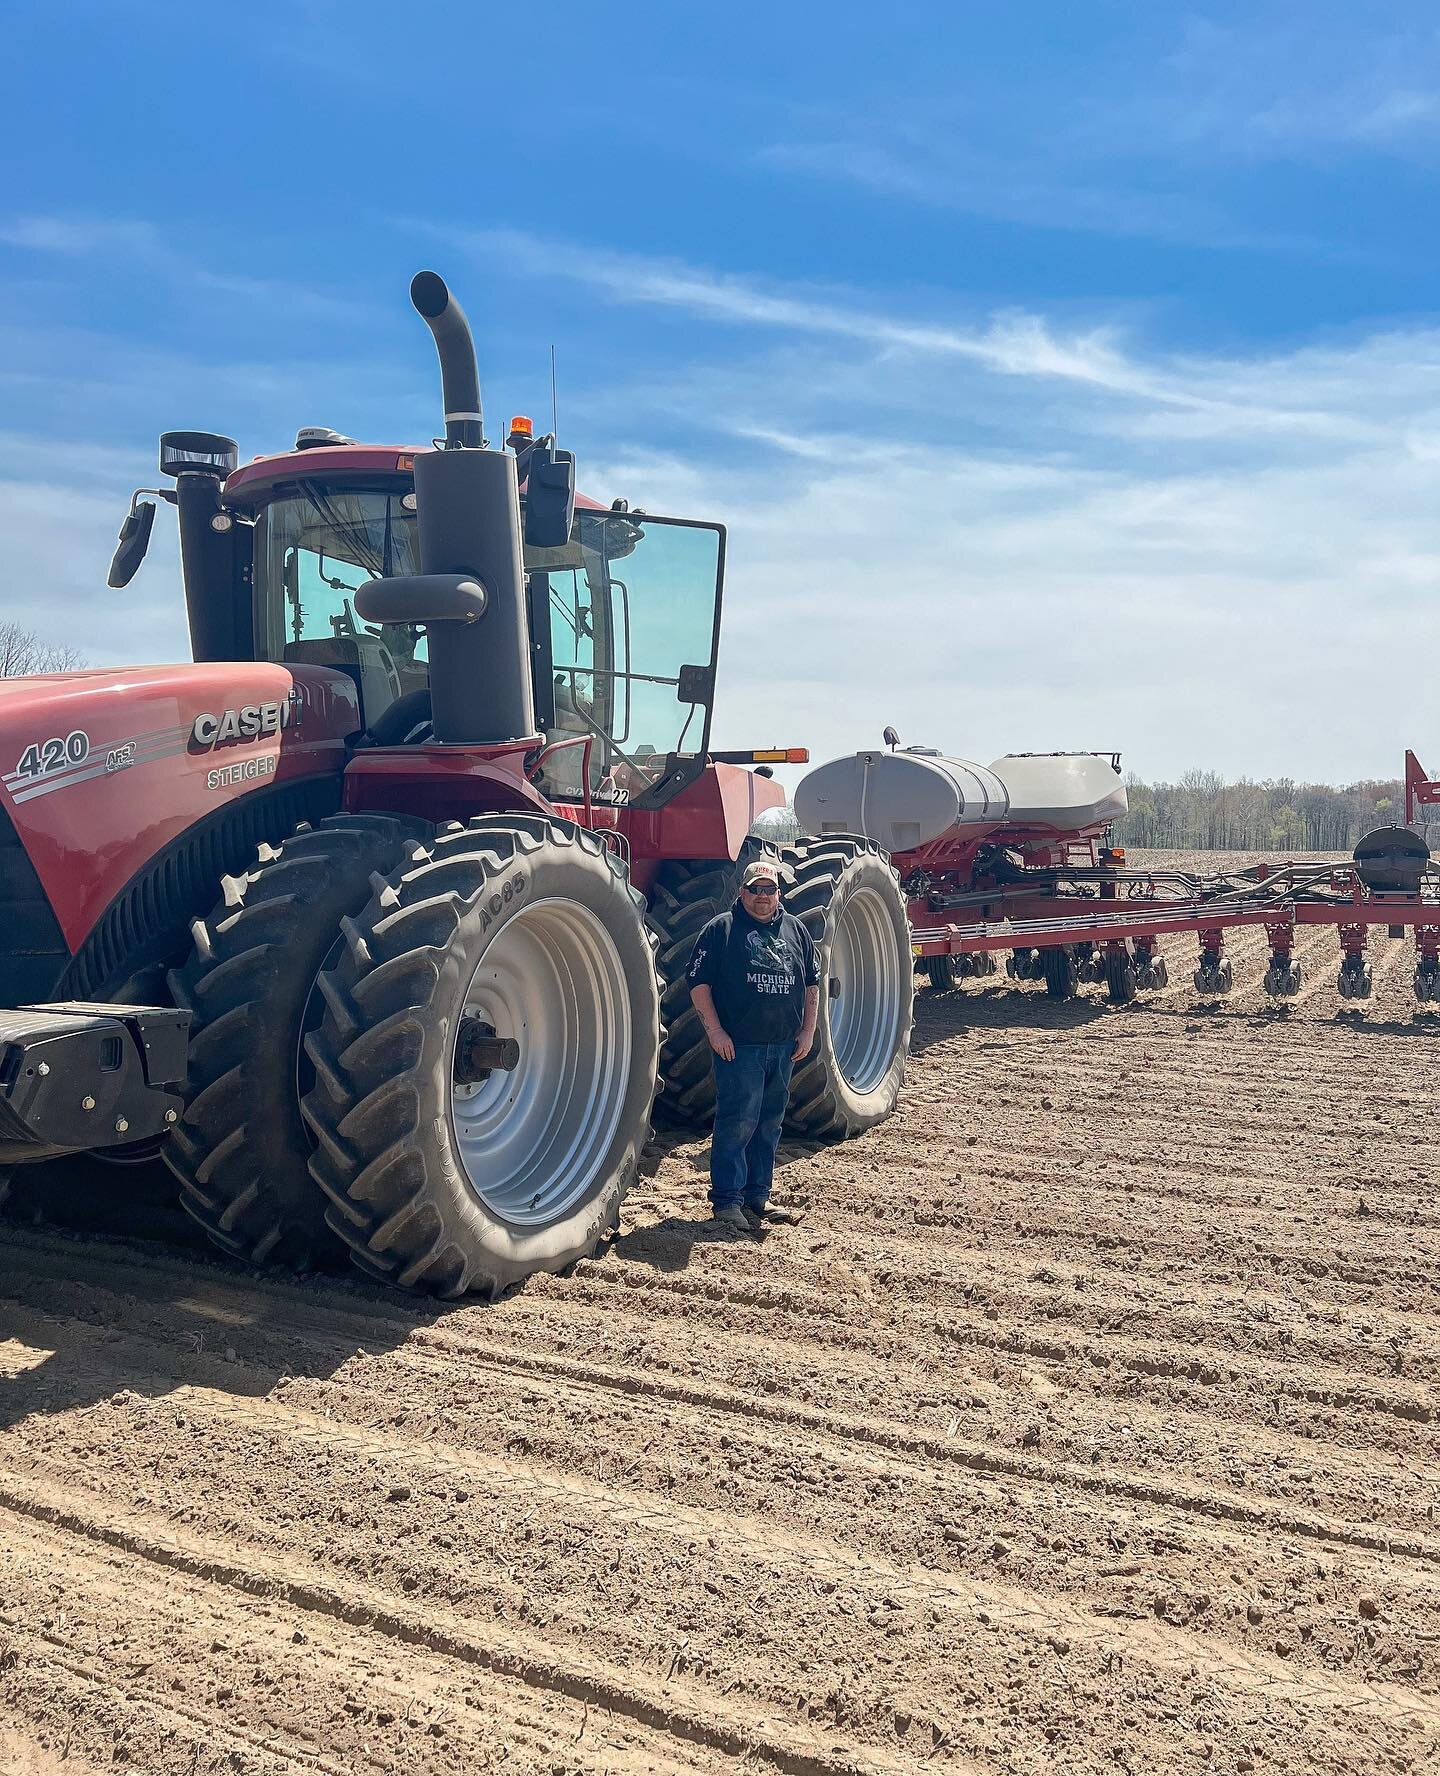 It&rsquo;s time to plant some soybeans!
This is Mort, one of our planting &amp; harvest specialists. If he&rsquo;s not busy working the ground, you can find him cleaning up our fence rows with the excavator. He joined our team over 11 years ago and w